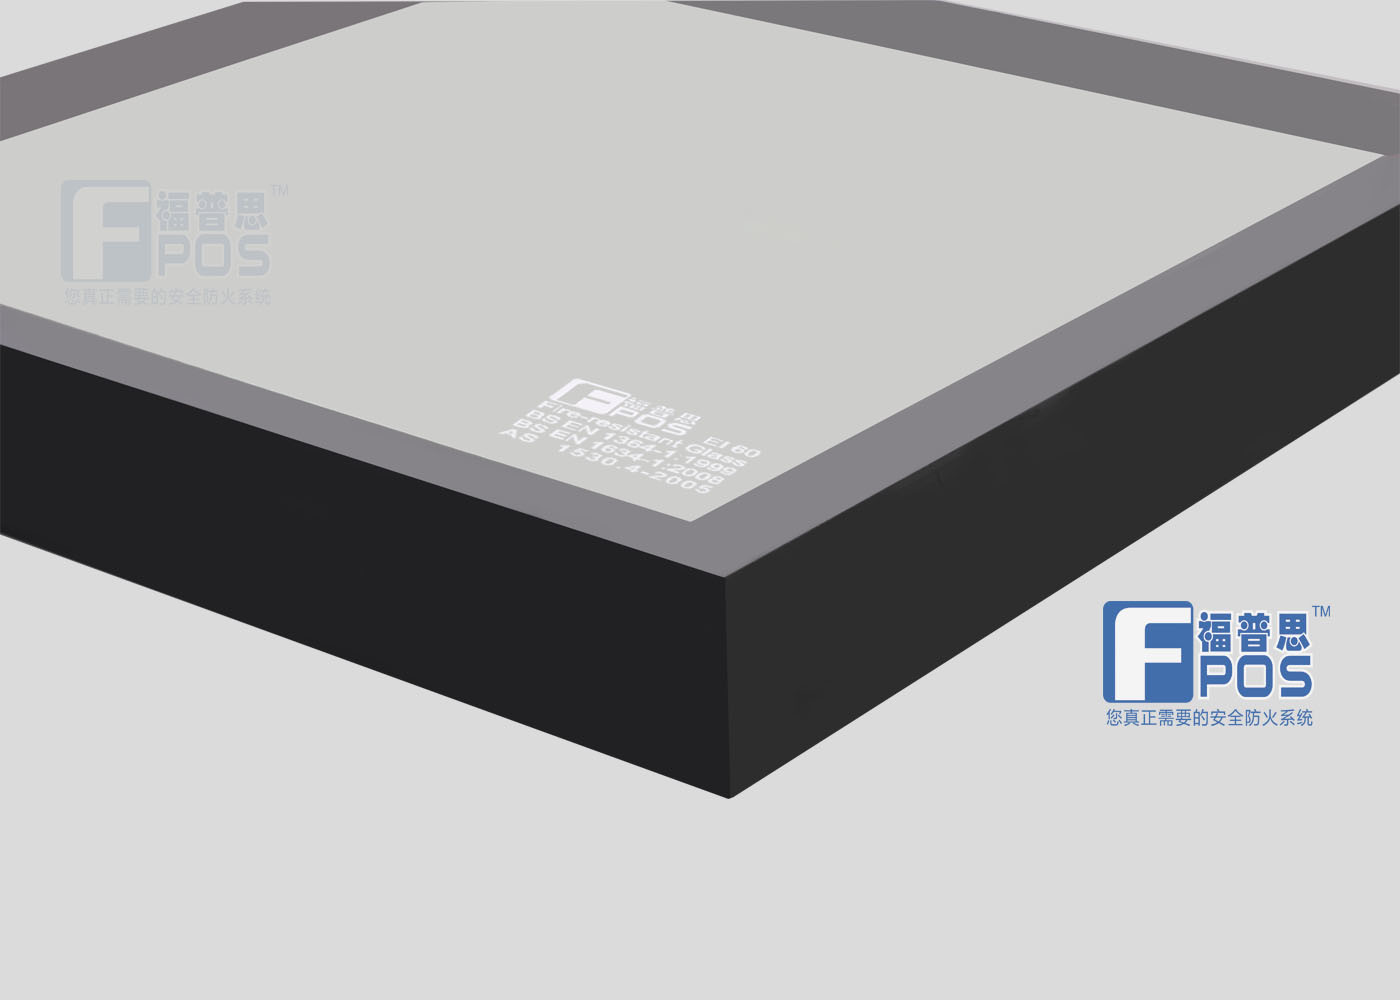 15mm Fpos Fire Resistant Glass Tempered Glass Processing for Skylight and Building